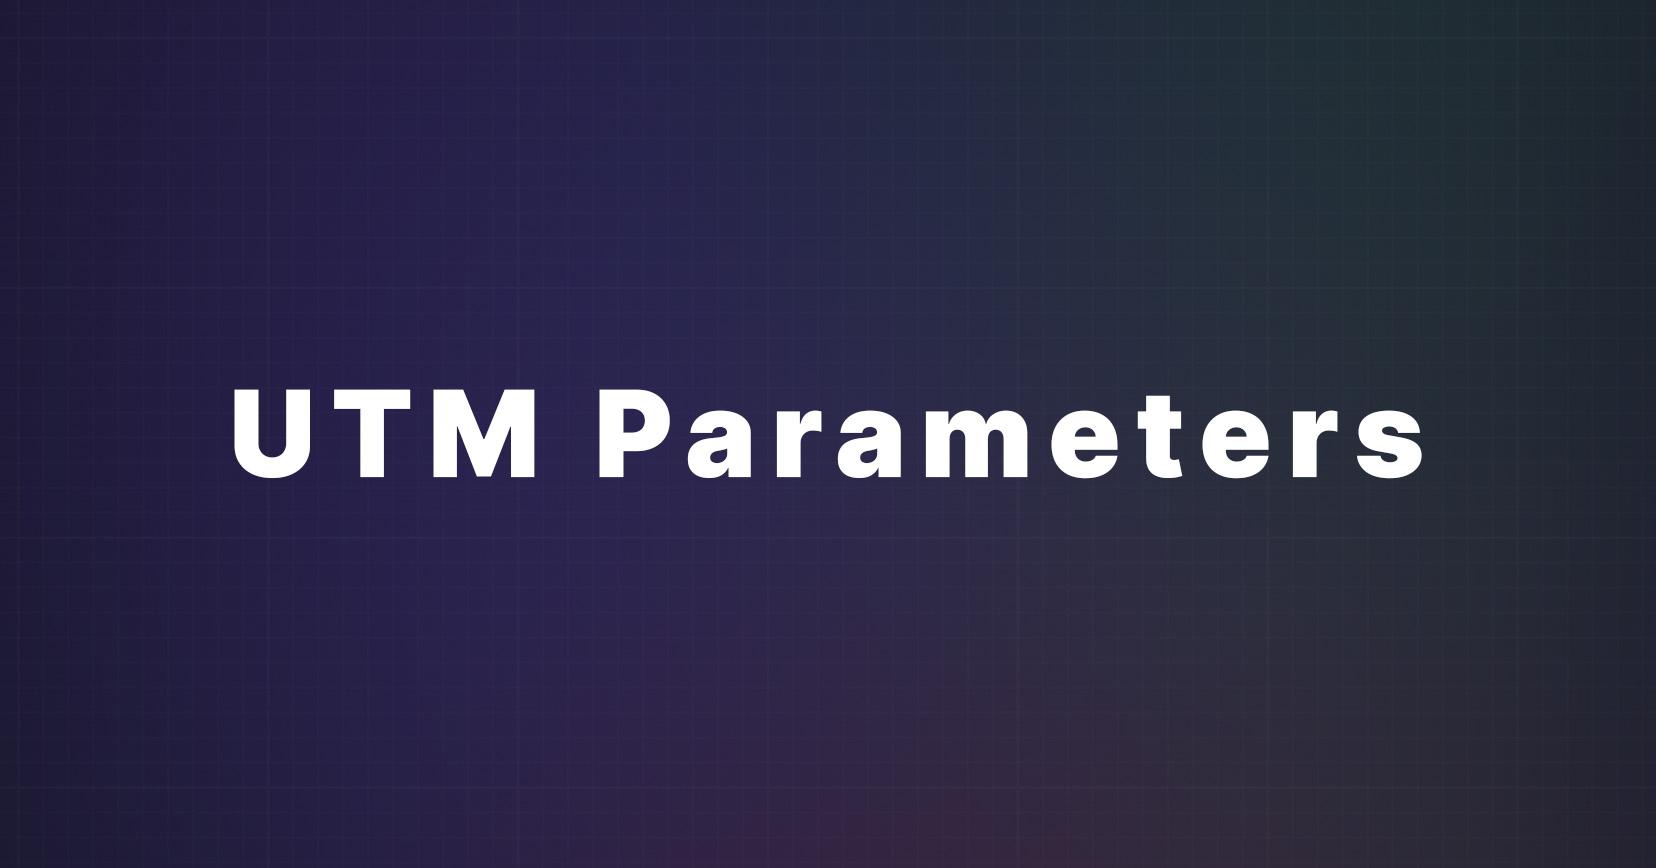 What are UTM parameters